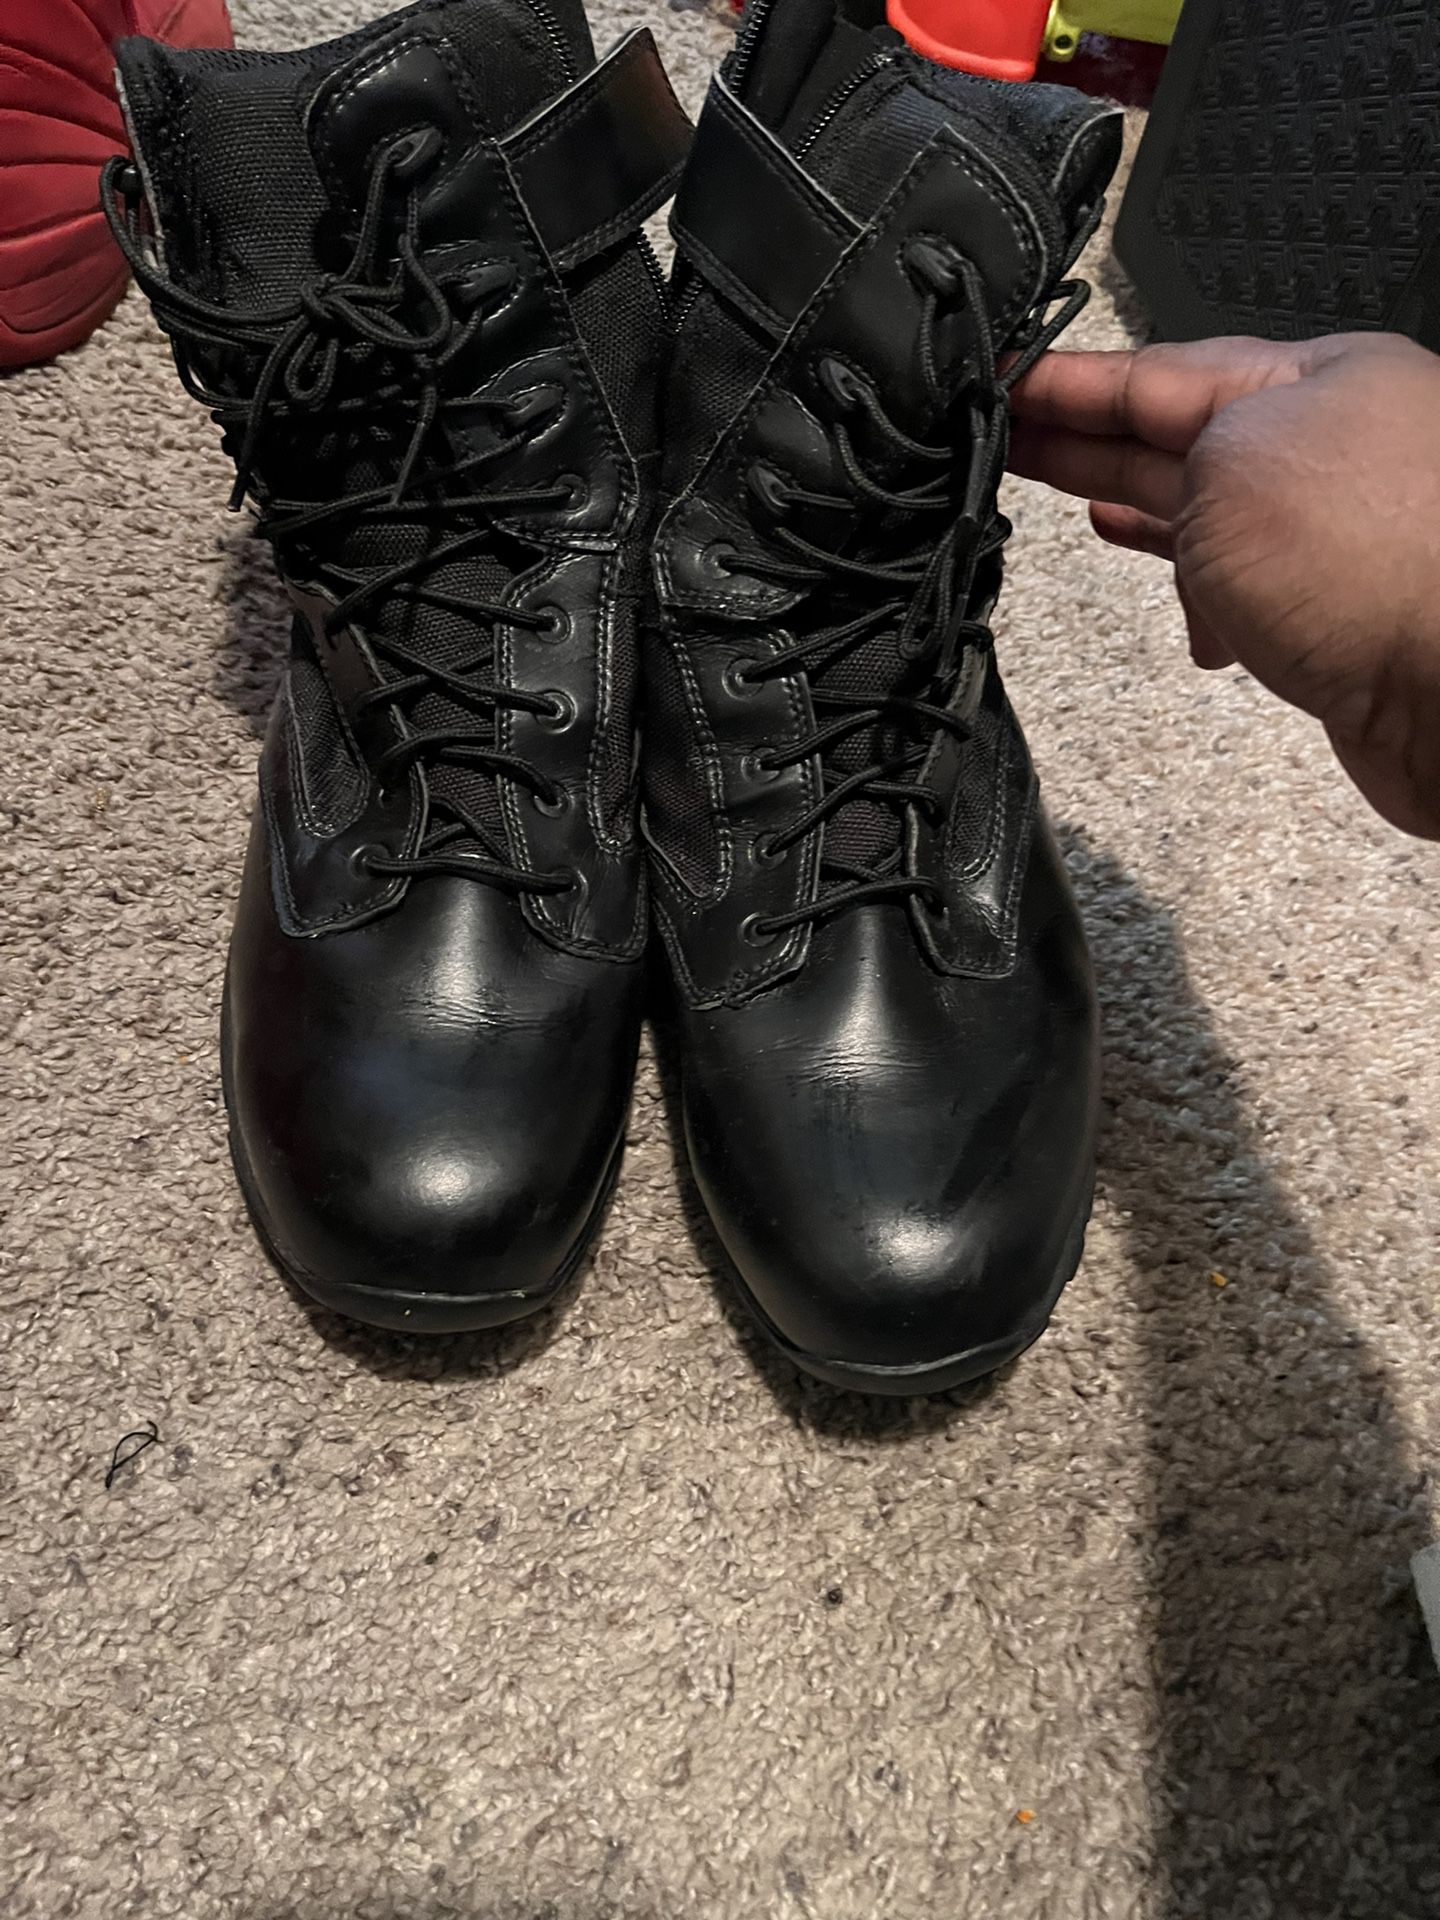 $80 Steel Toe Work Boots For Sale Size 13